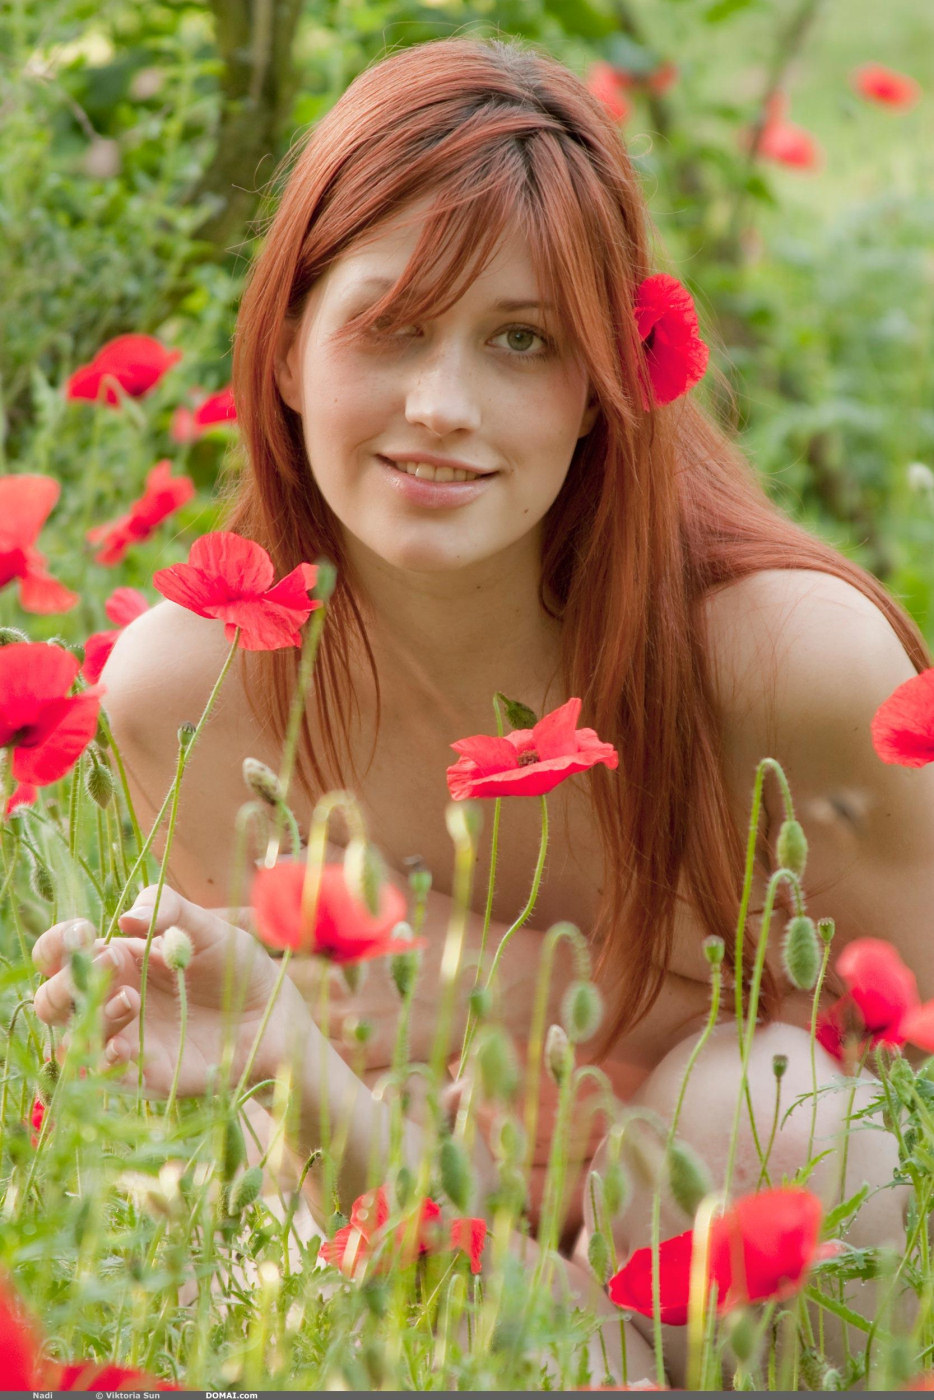 Exciting perfect body nude young tall Nadi is in the field among red flowers - 18-Domai_Nadi-2_Nadi_high_0018 from Domai